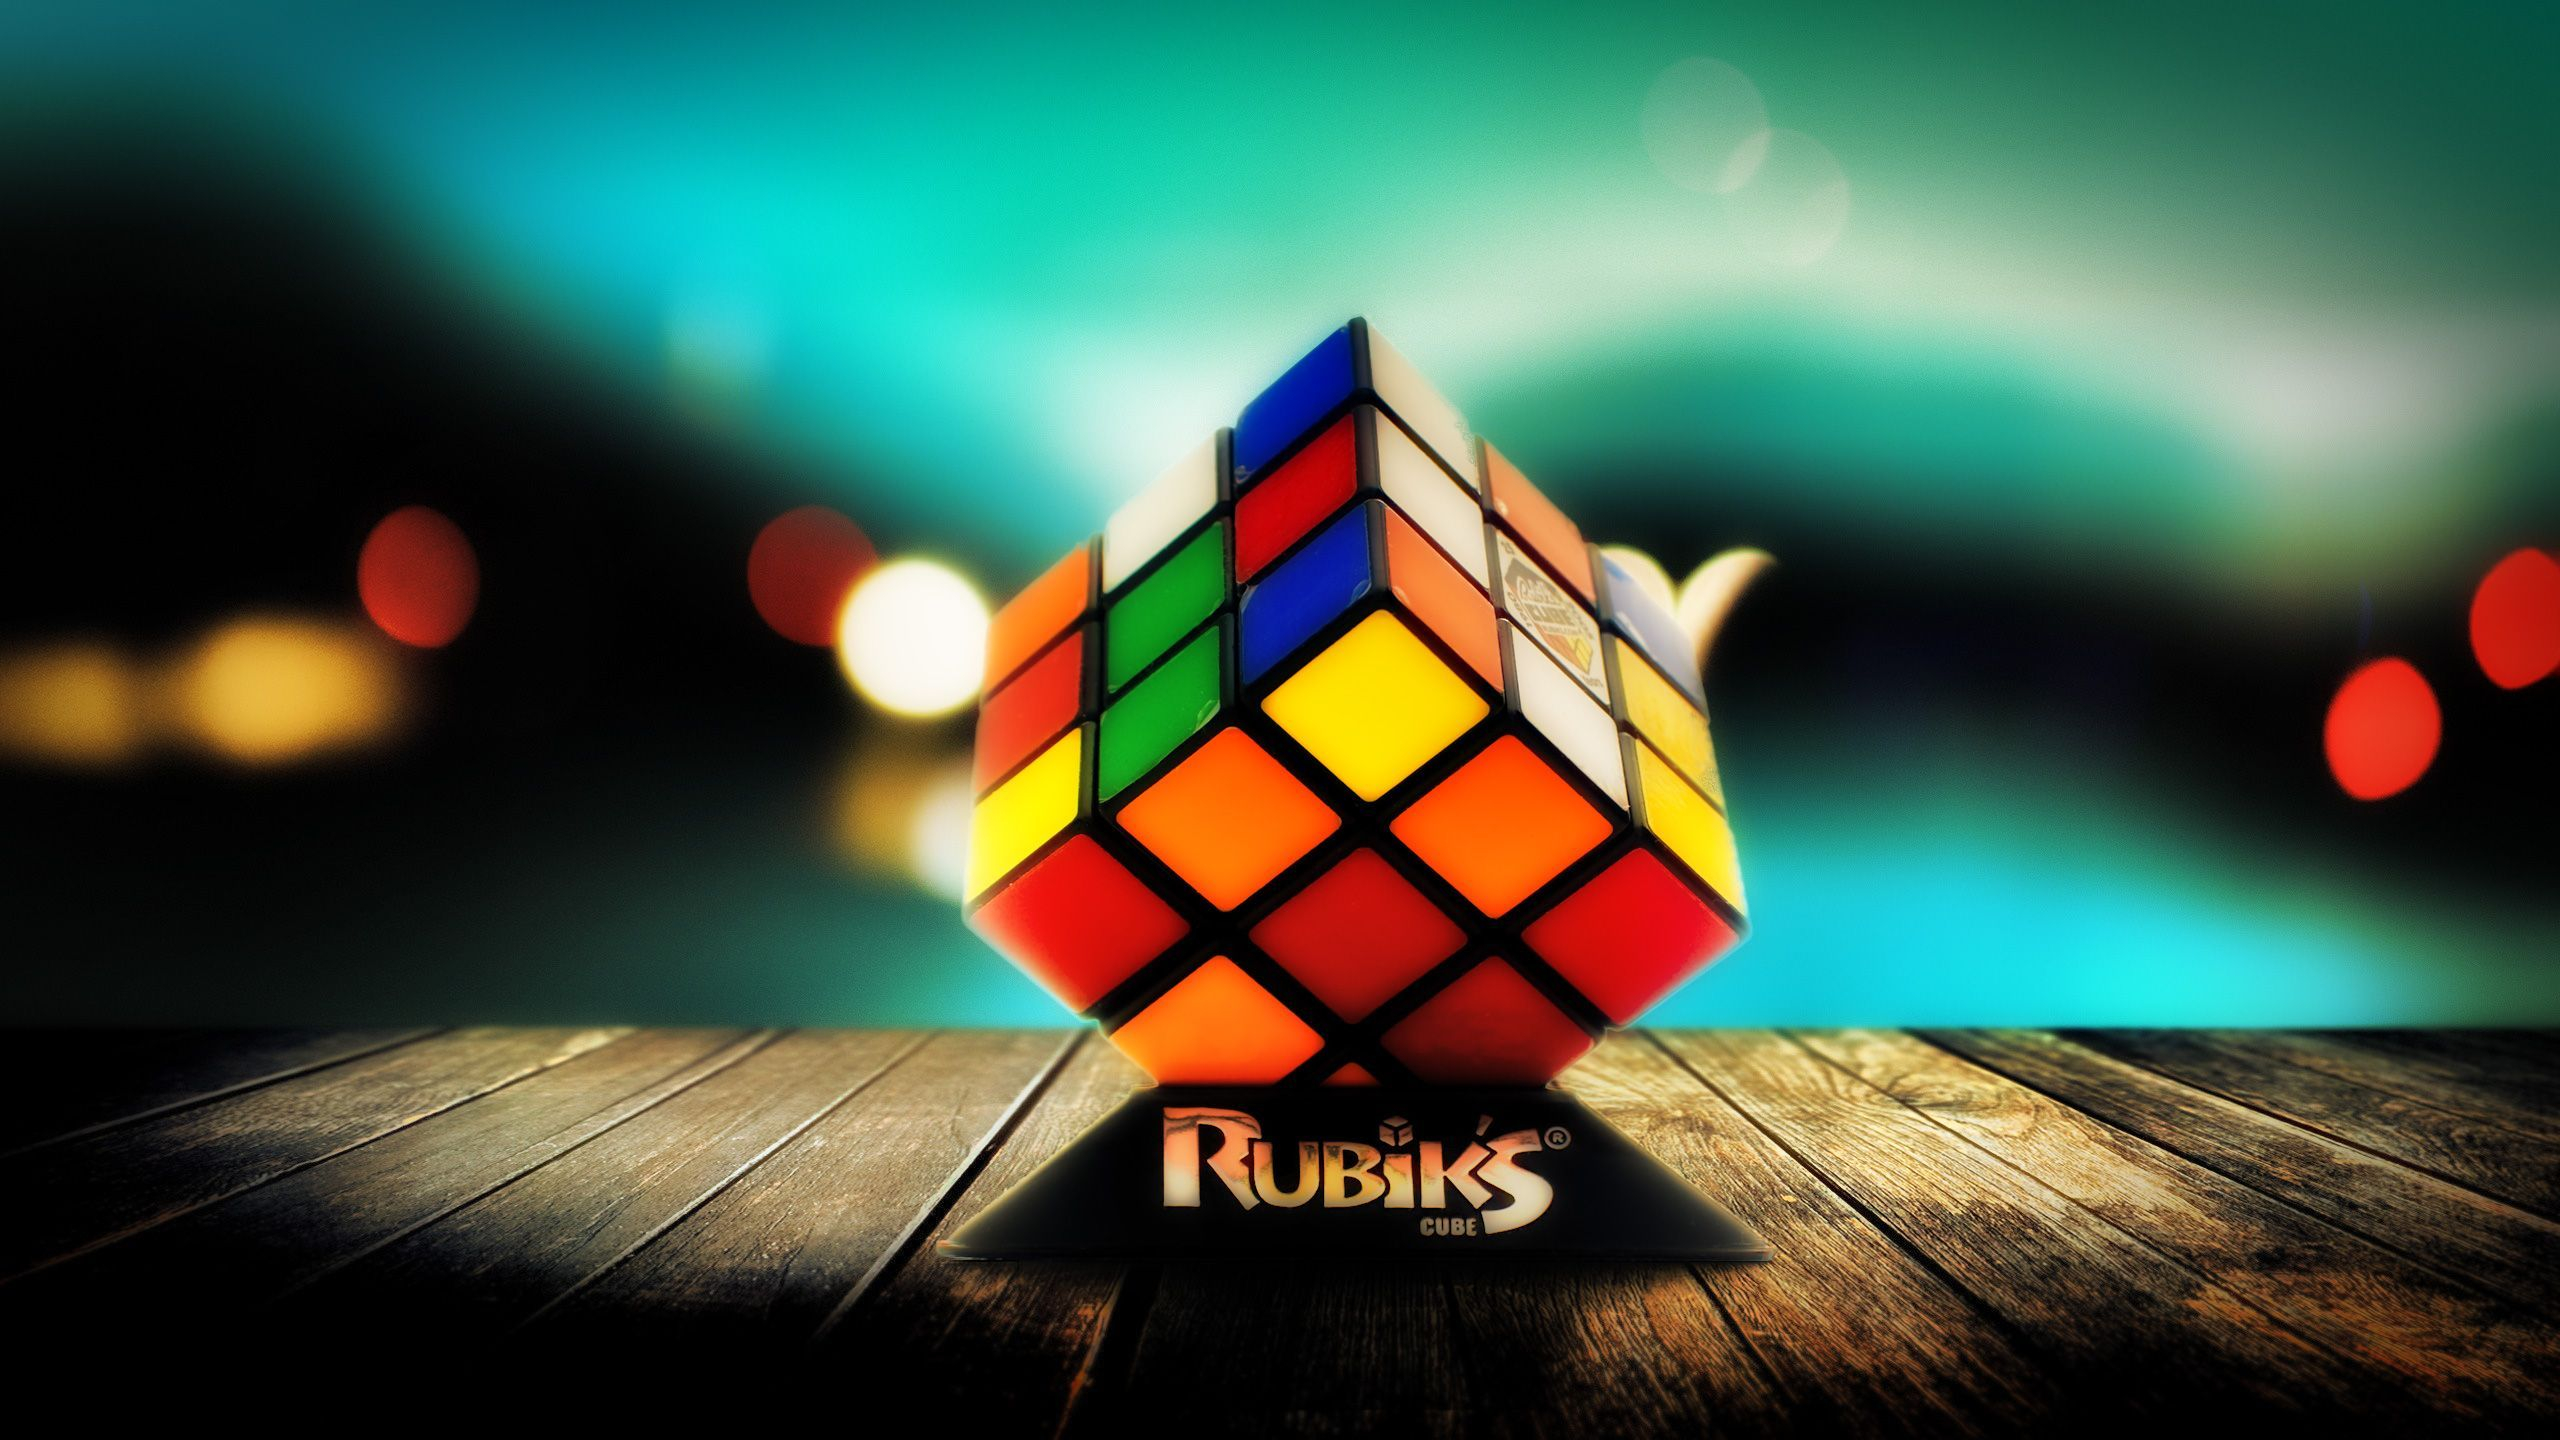 2560x1440 Rubik's Cube Wallpapers Top Free Rubik's Cube Backgrounds